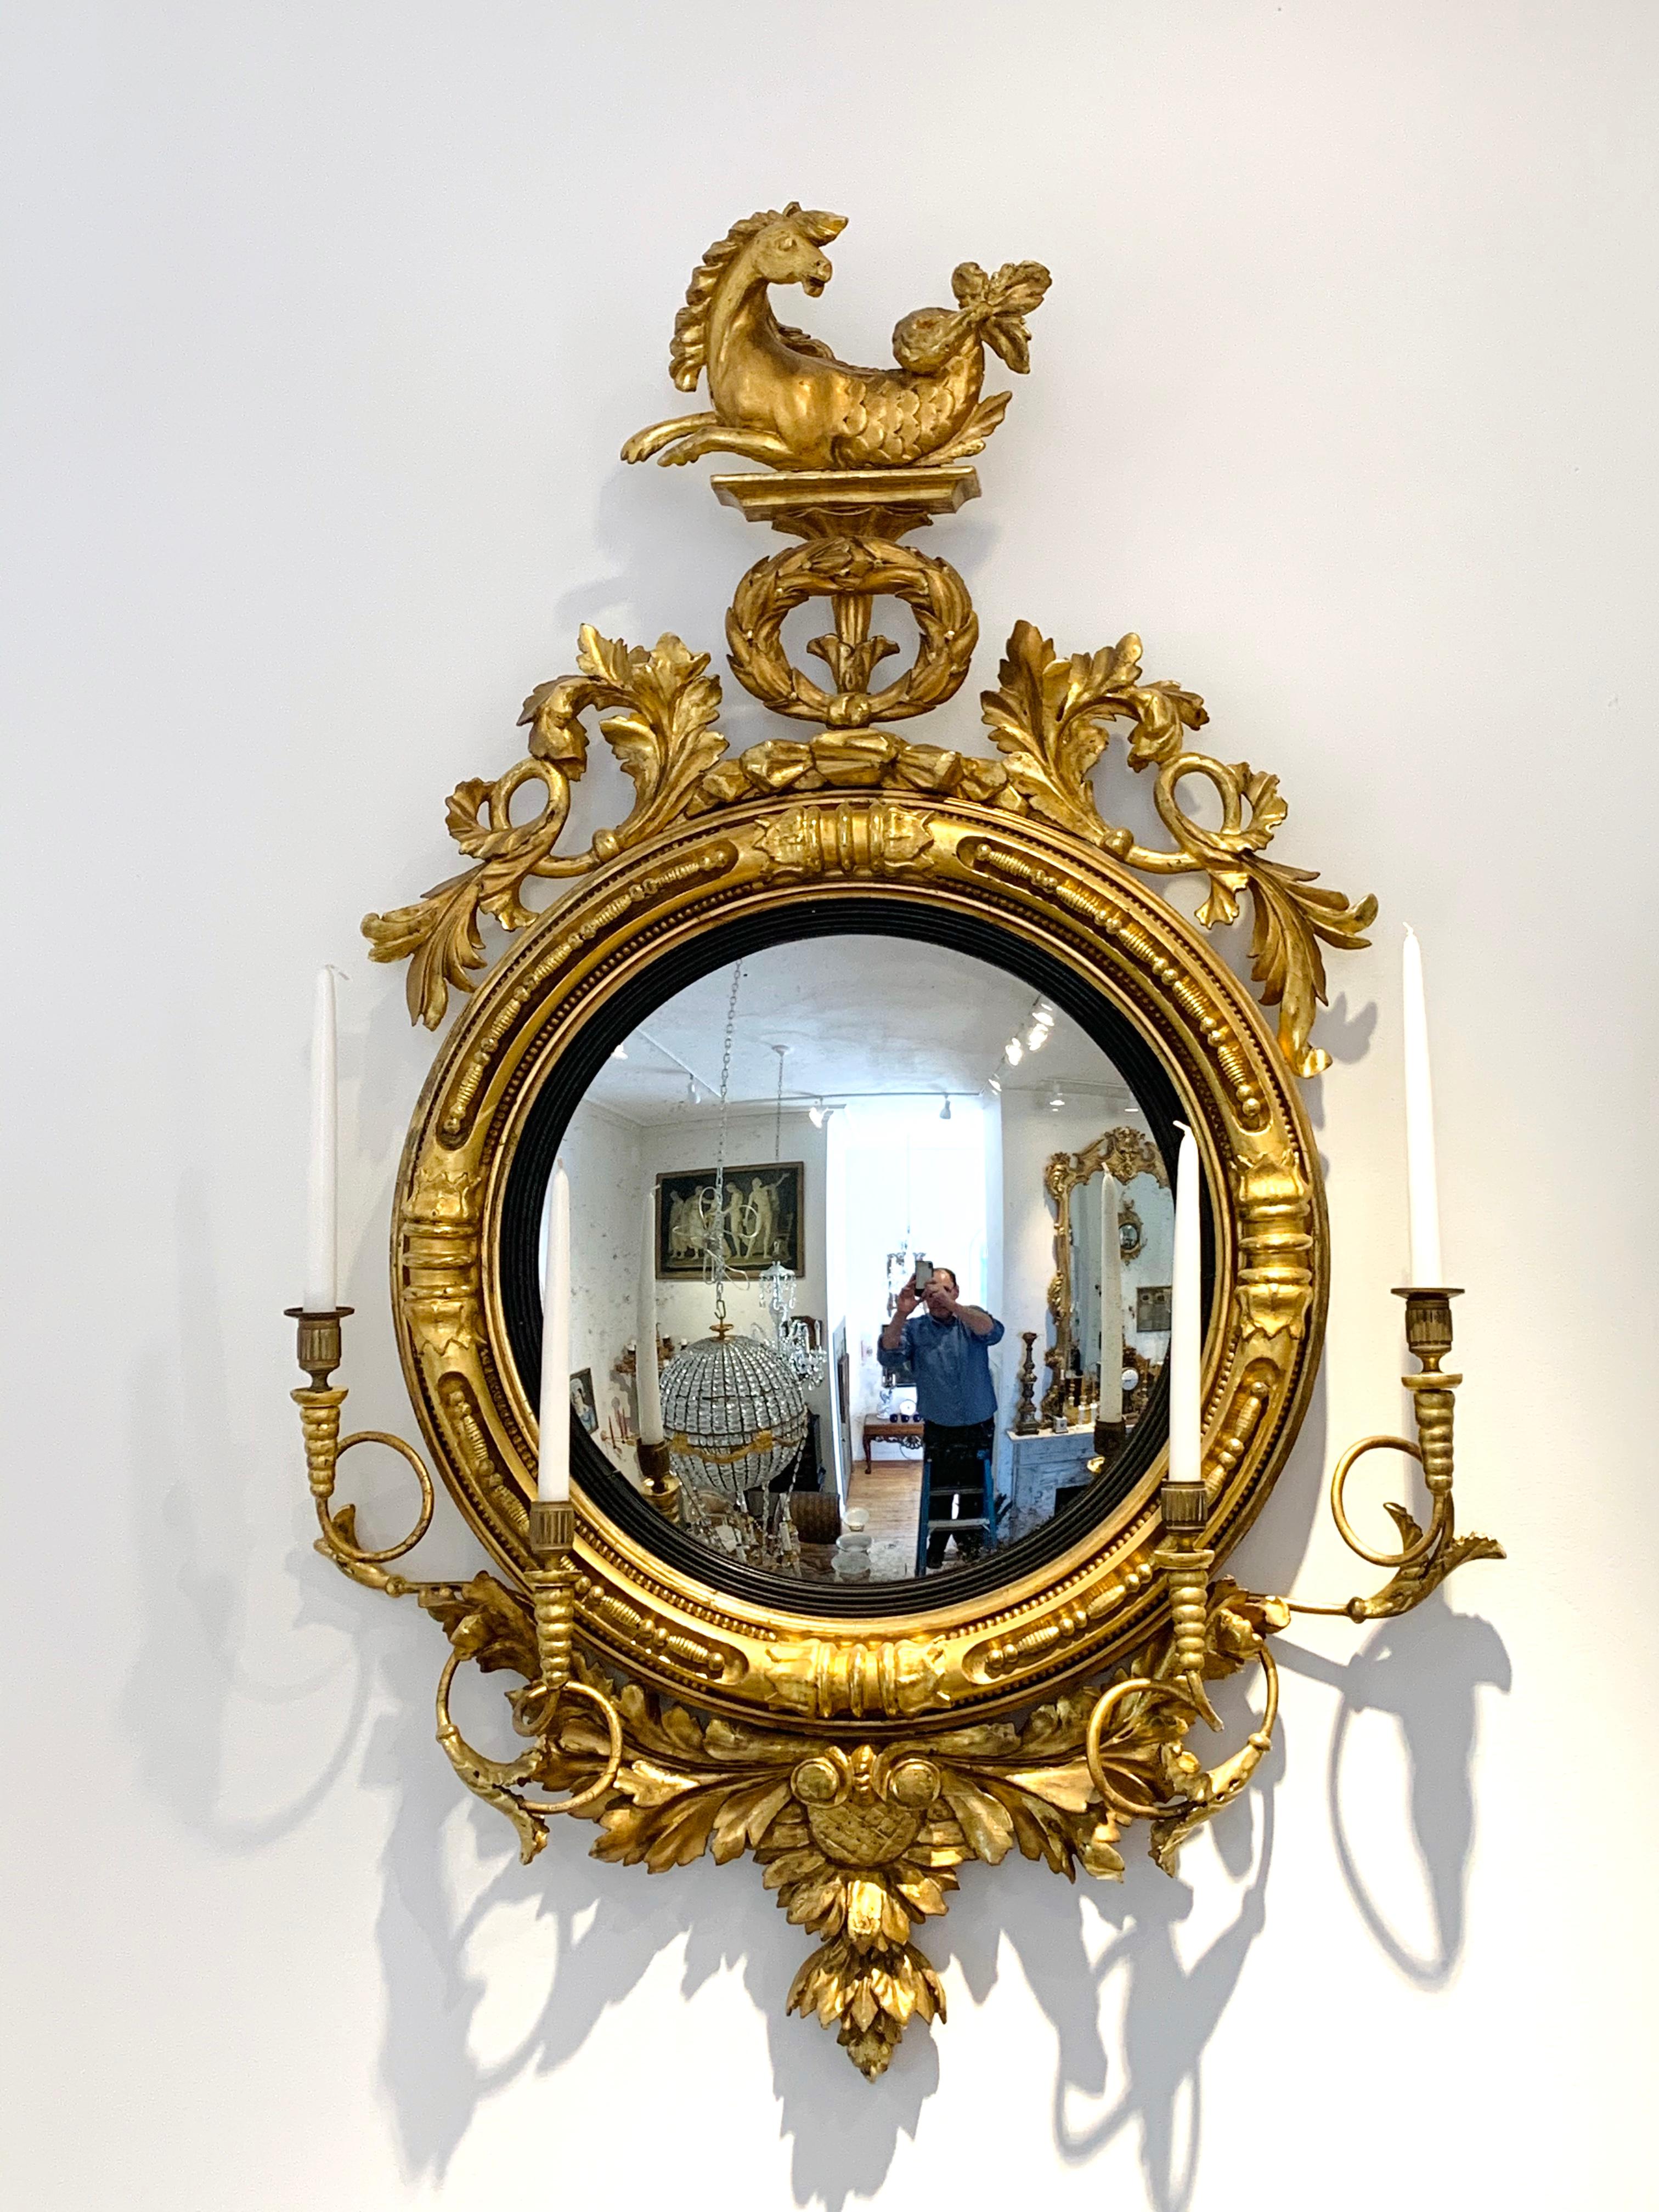 Rare pair of Regency convex or bullseye mirrors --Original gilding being conserved and restored at the moment. Original girandole candle arms. Original convex mirrors and silvering --sunflower motif on bottom and true pair of Hippogryphs on top.